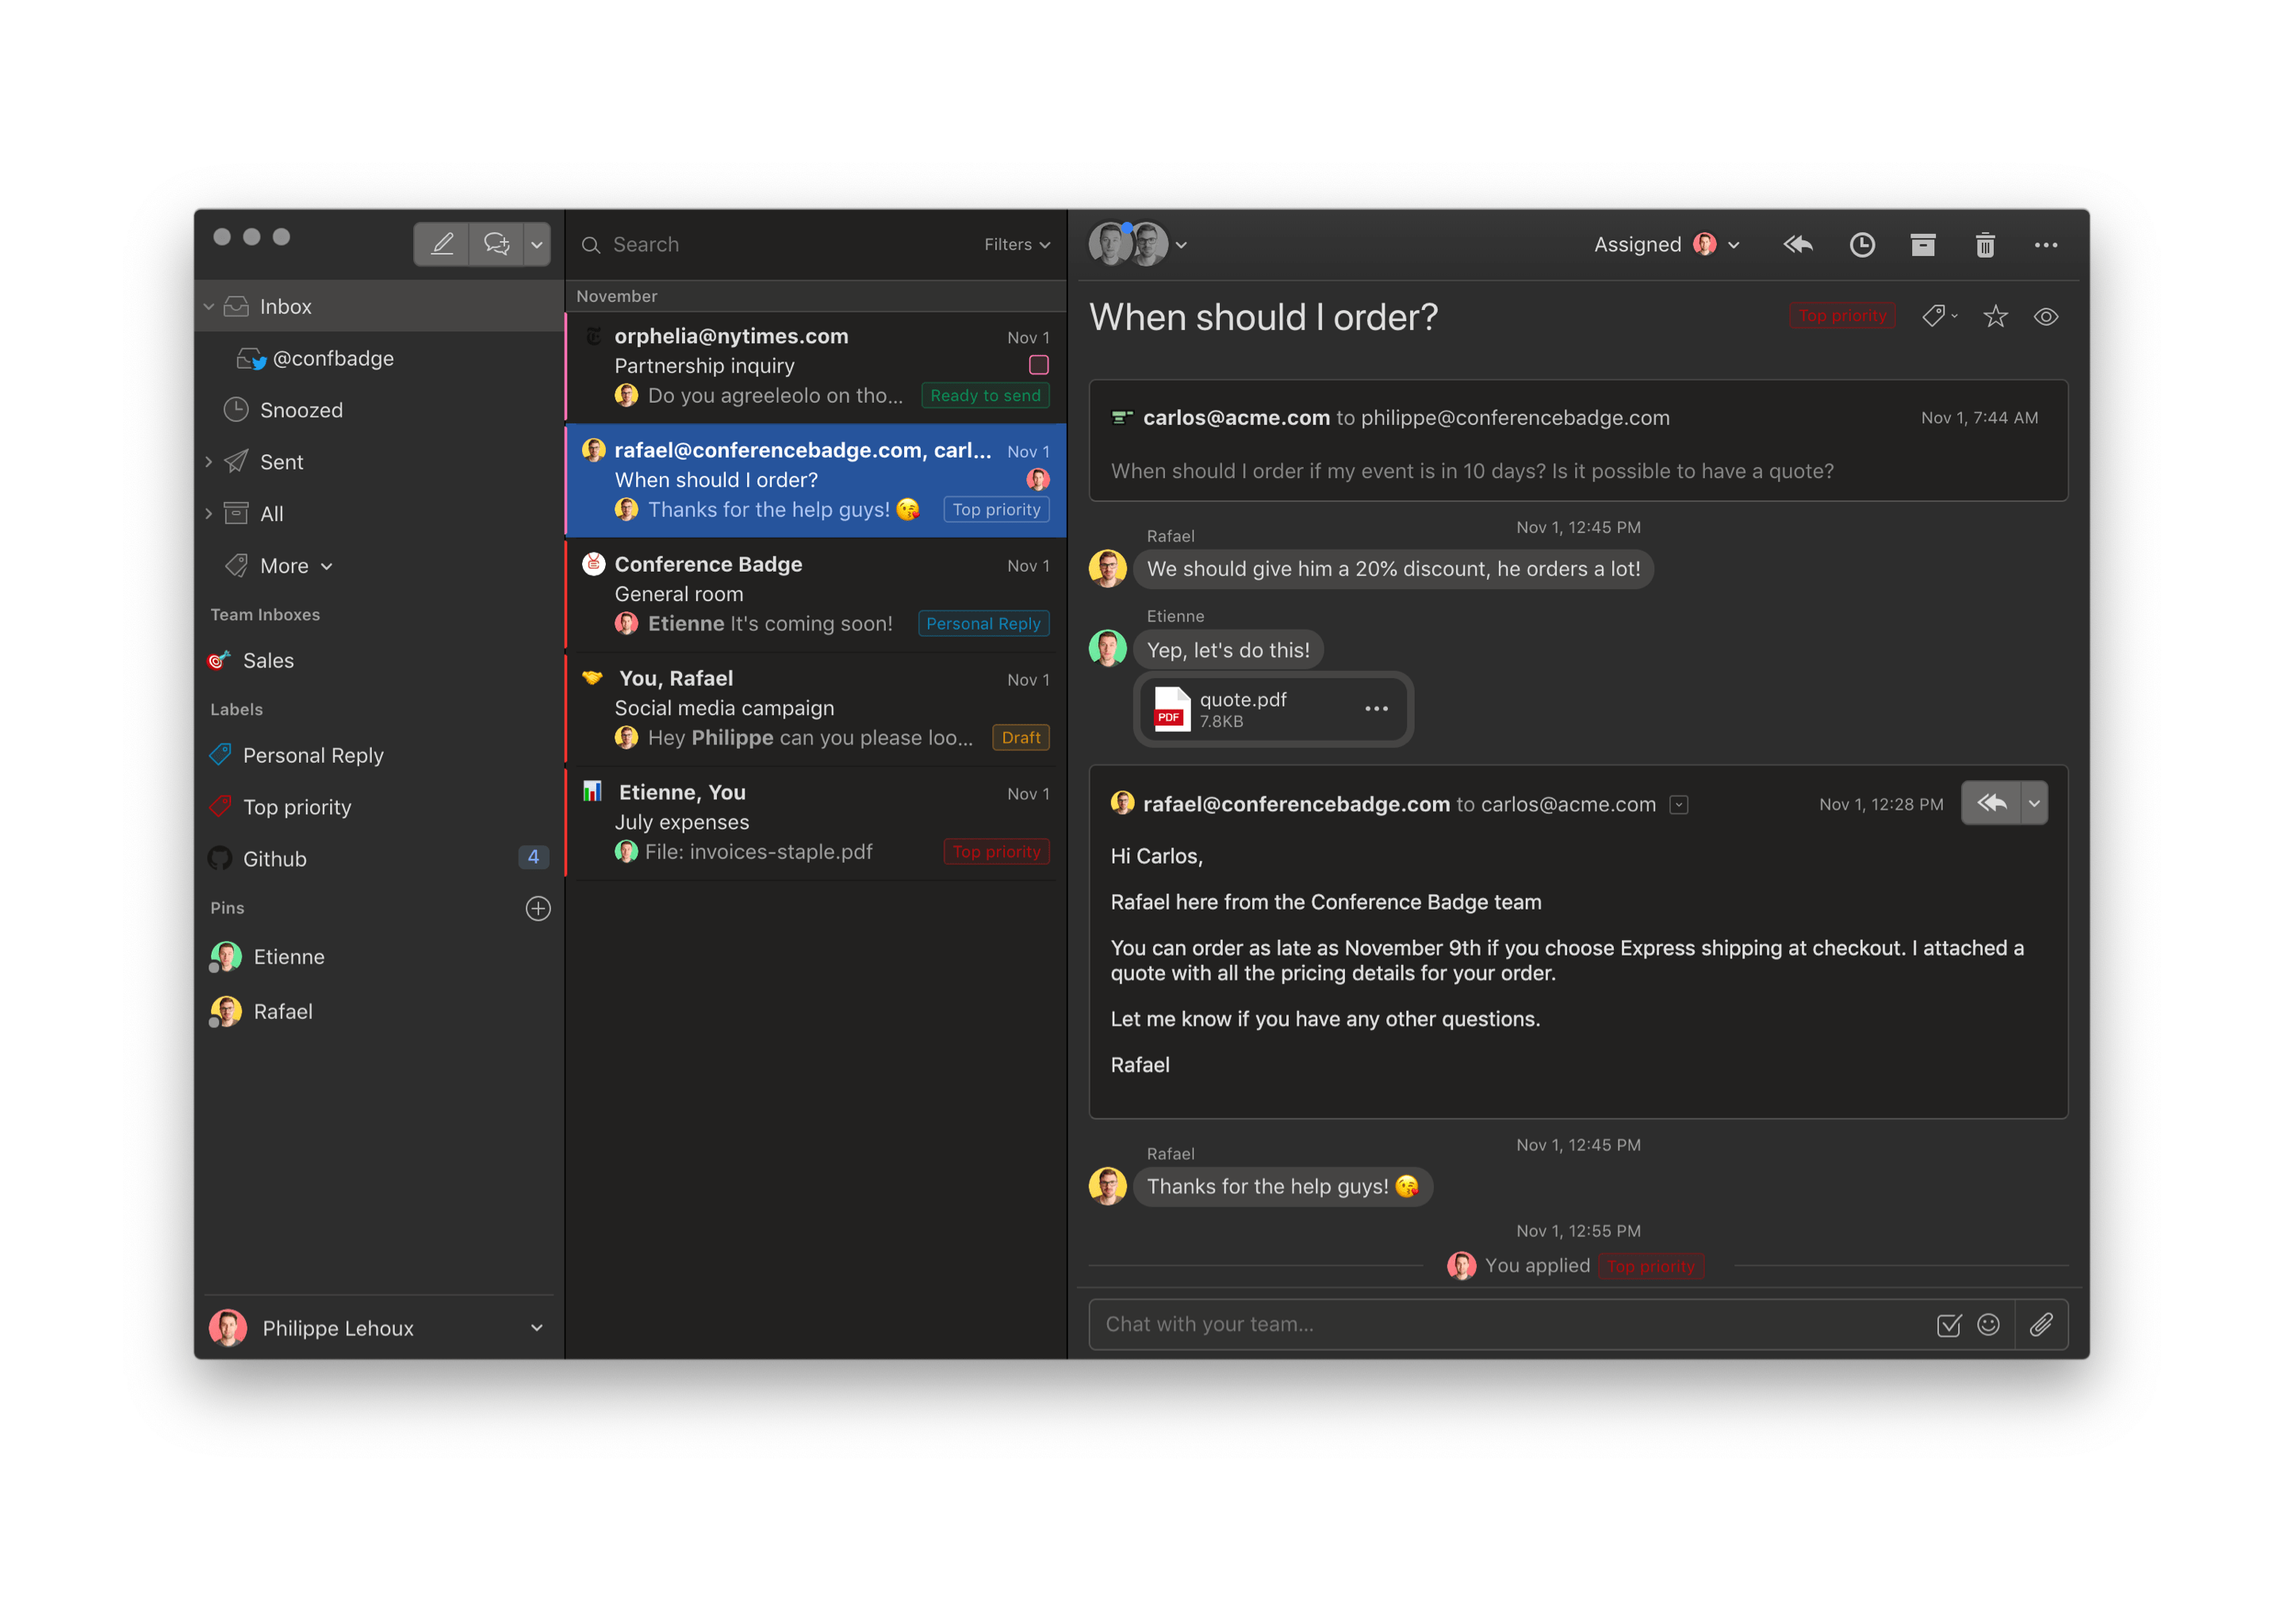 Dark mode available